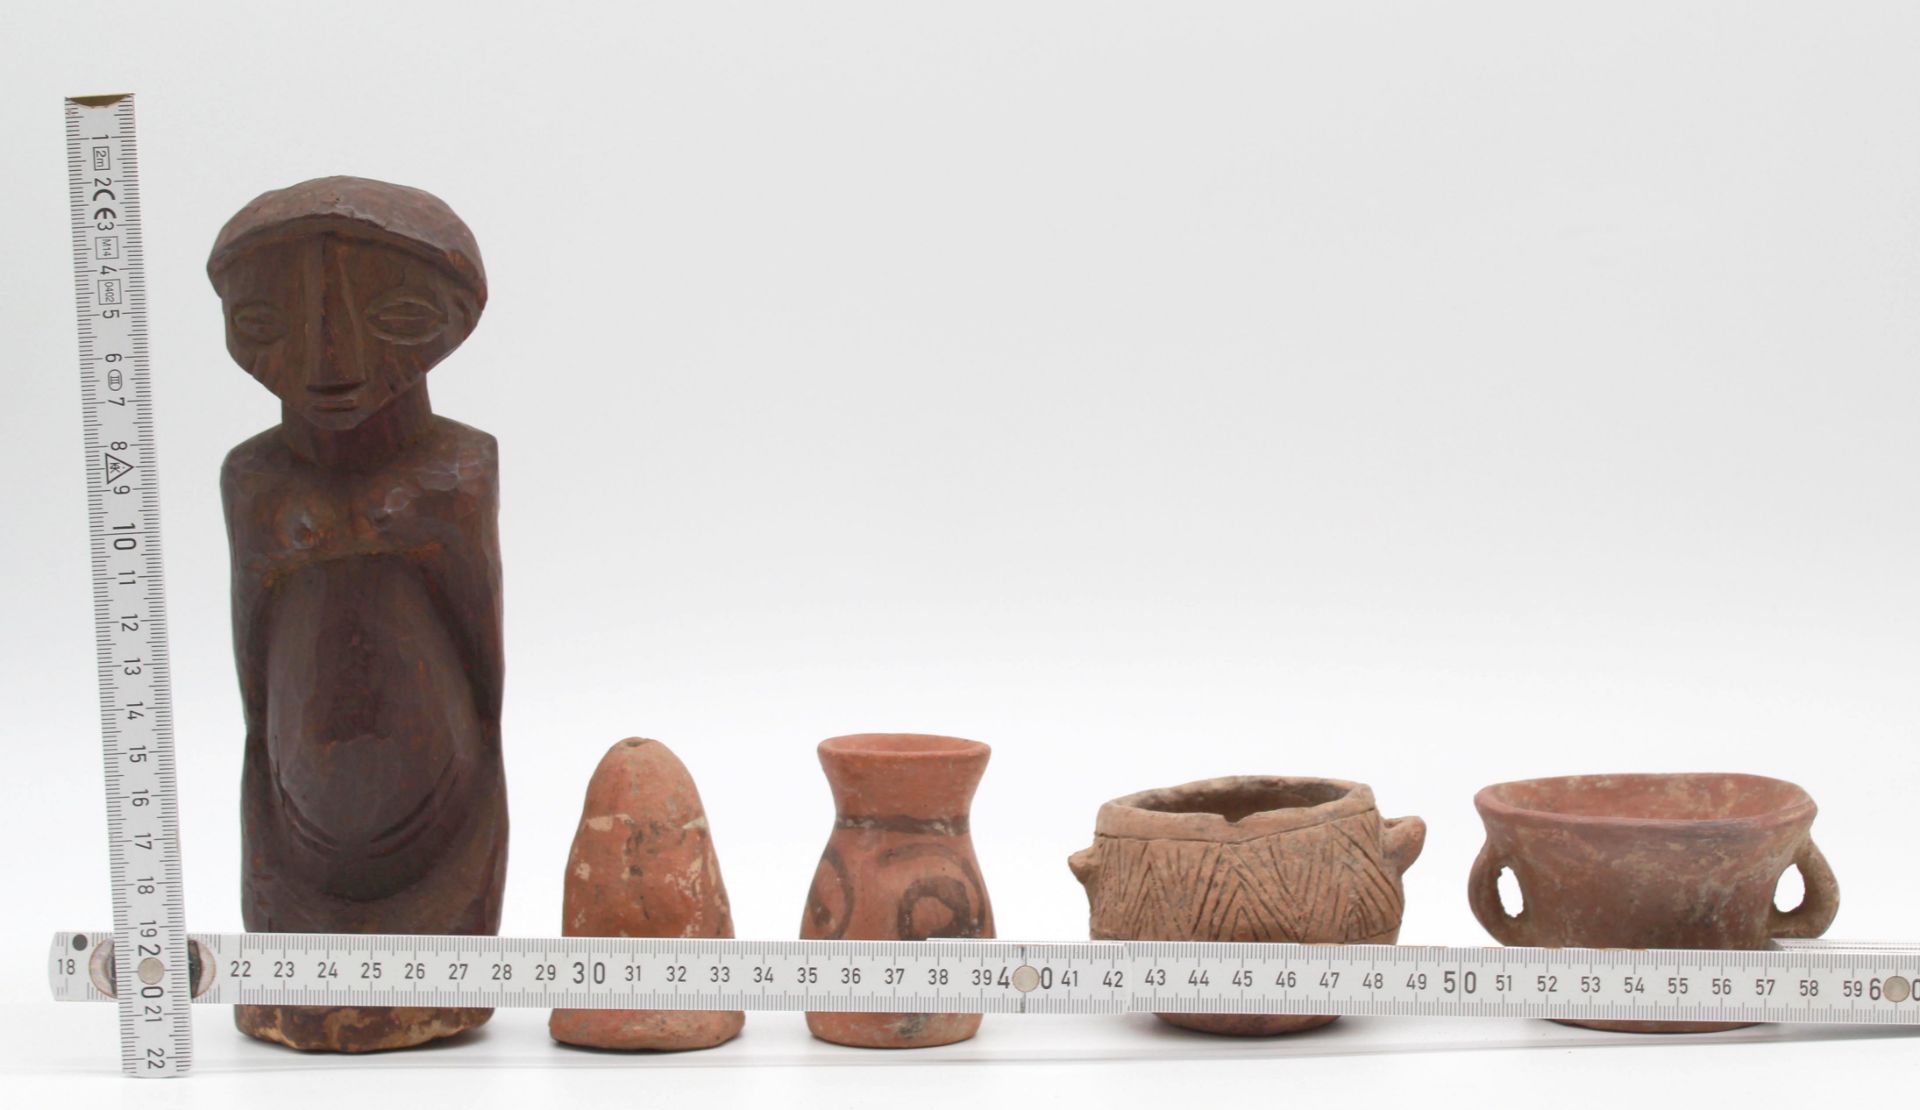 4 ceramics and a figure wood. Probably West Africa, Sahara. - Image 6 of 14